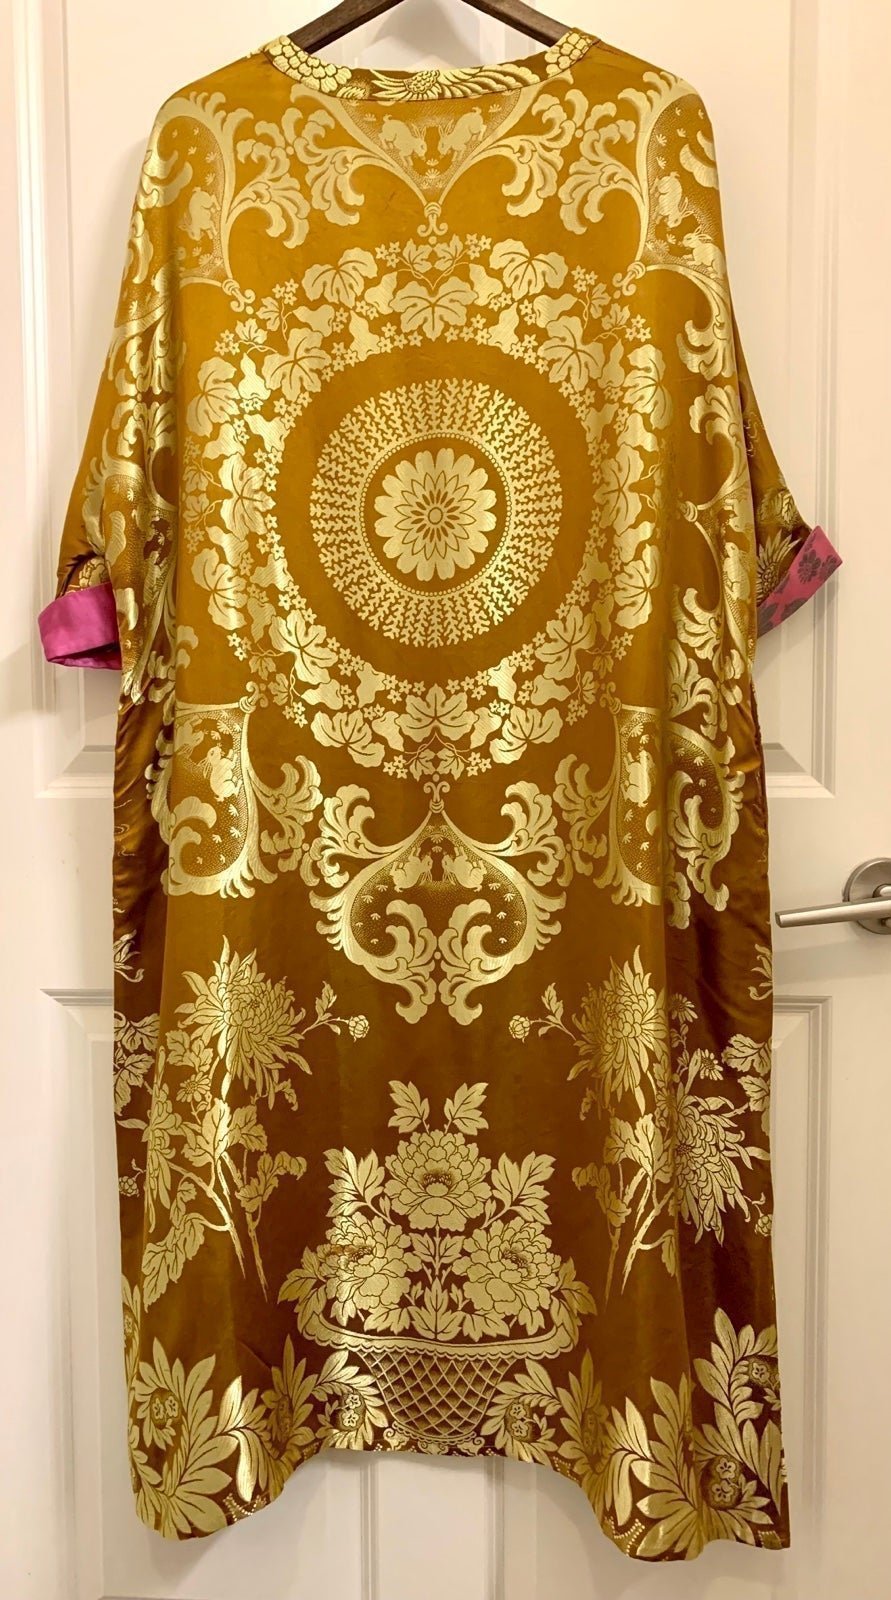 large selection Mulberry Silk Tunic Dress Robe NEW me0XtaCkp Online Shop